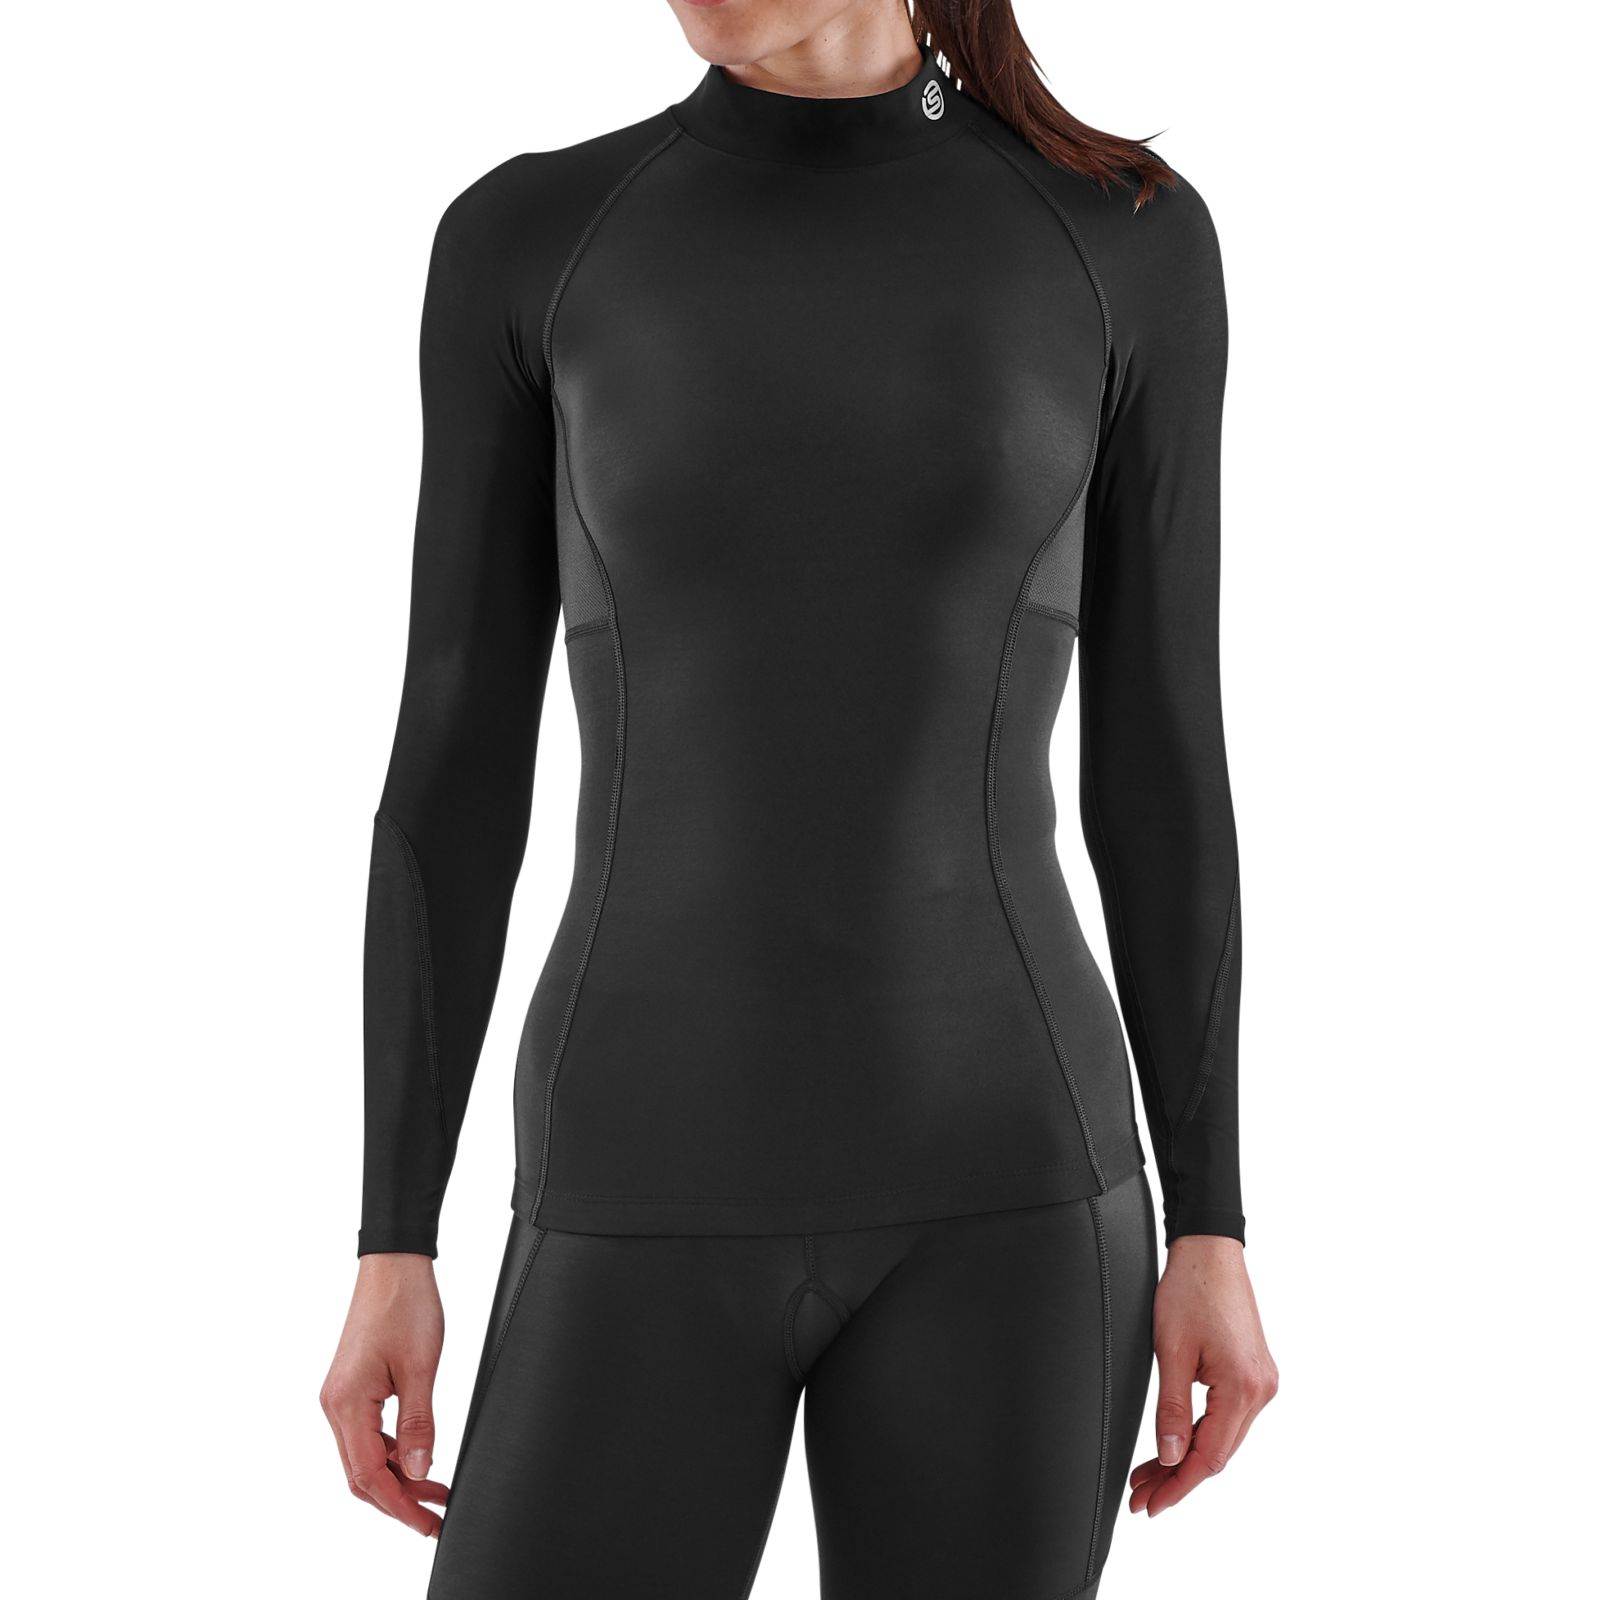  Thermajane Thermal Shirts For Women Long Sleeve